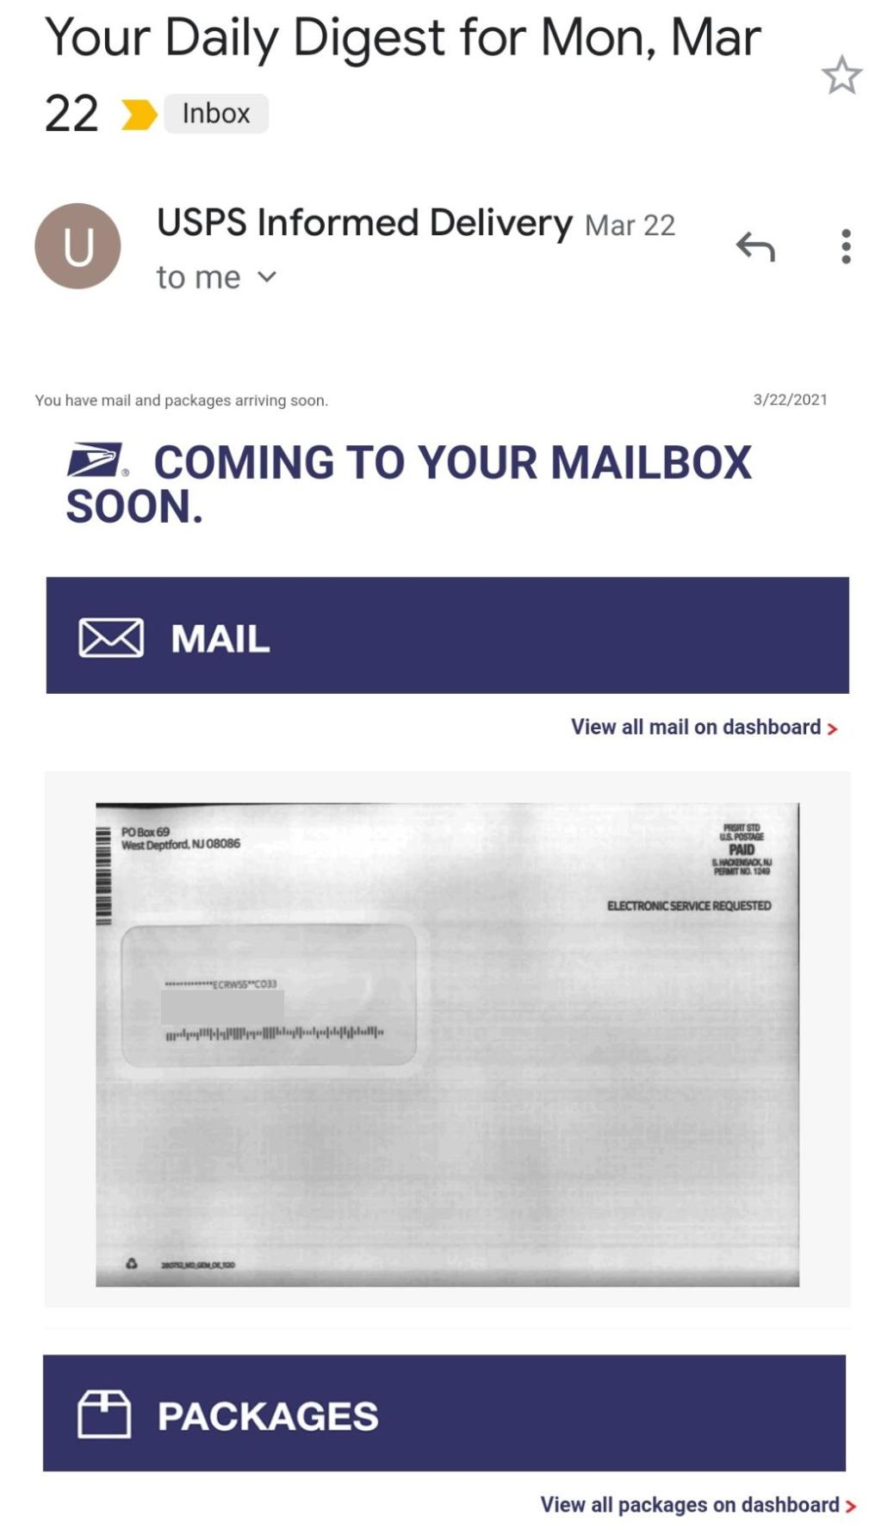 How to Maximize Your Mail for Informed Delivery Blog Who's Mailing